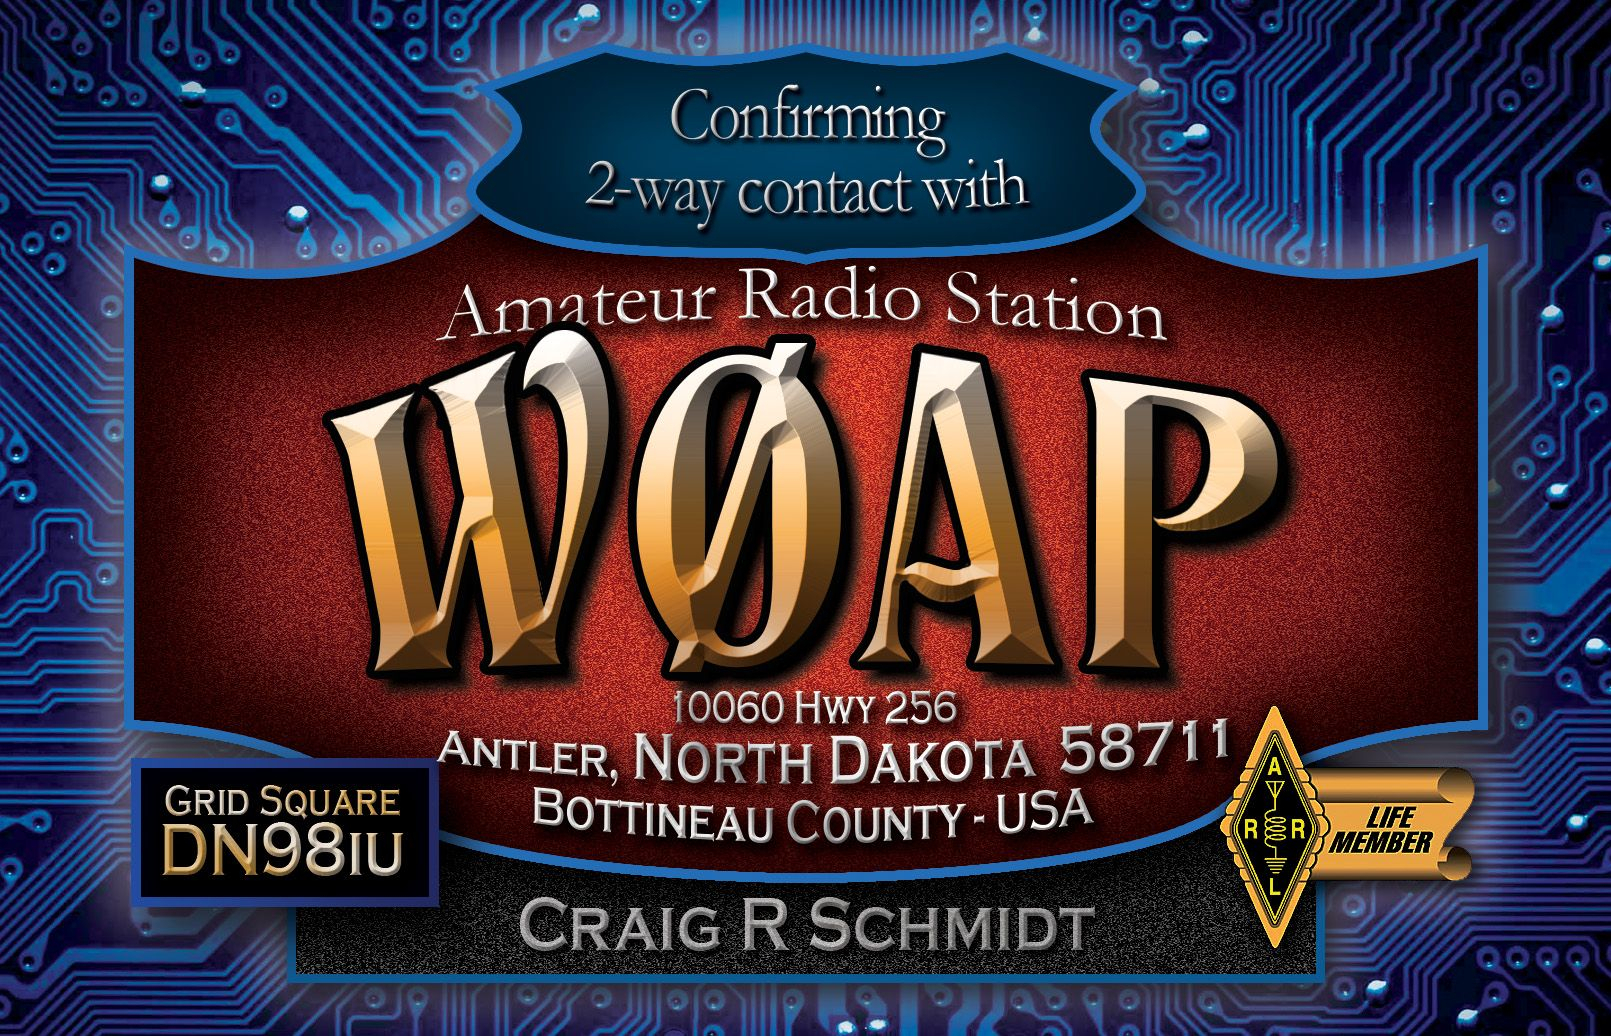 My New Ham Radio Qsl Card To Reflect My New Call Sign. After Pertaining To Qsl Card Template